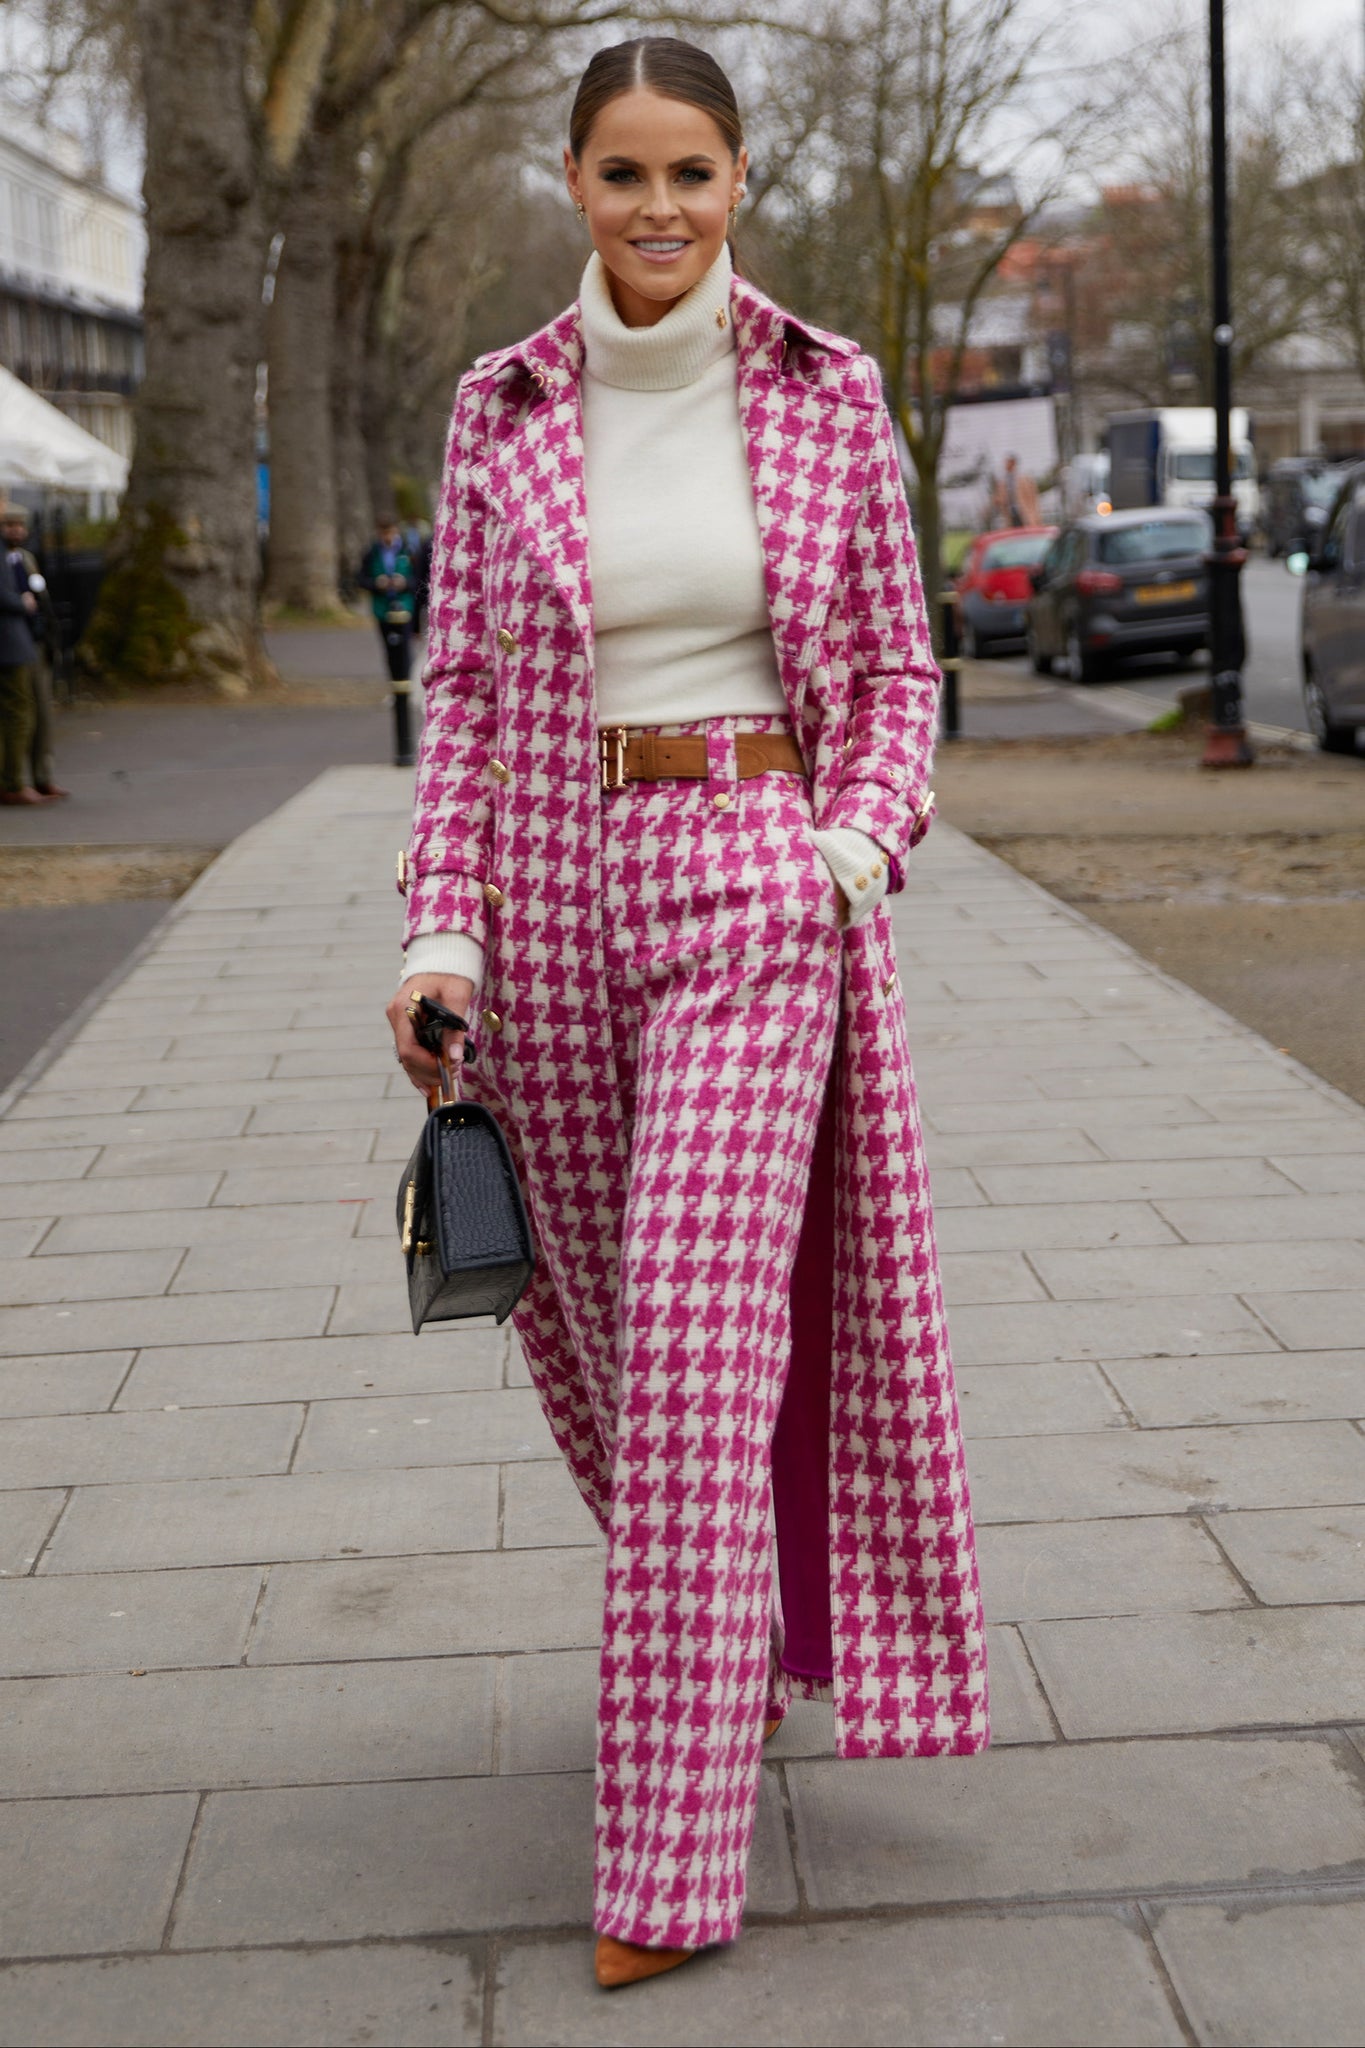 Jade's Hot Pink Houndstooth Look (Hot Pink Large Scale Houndstooth)